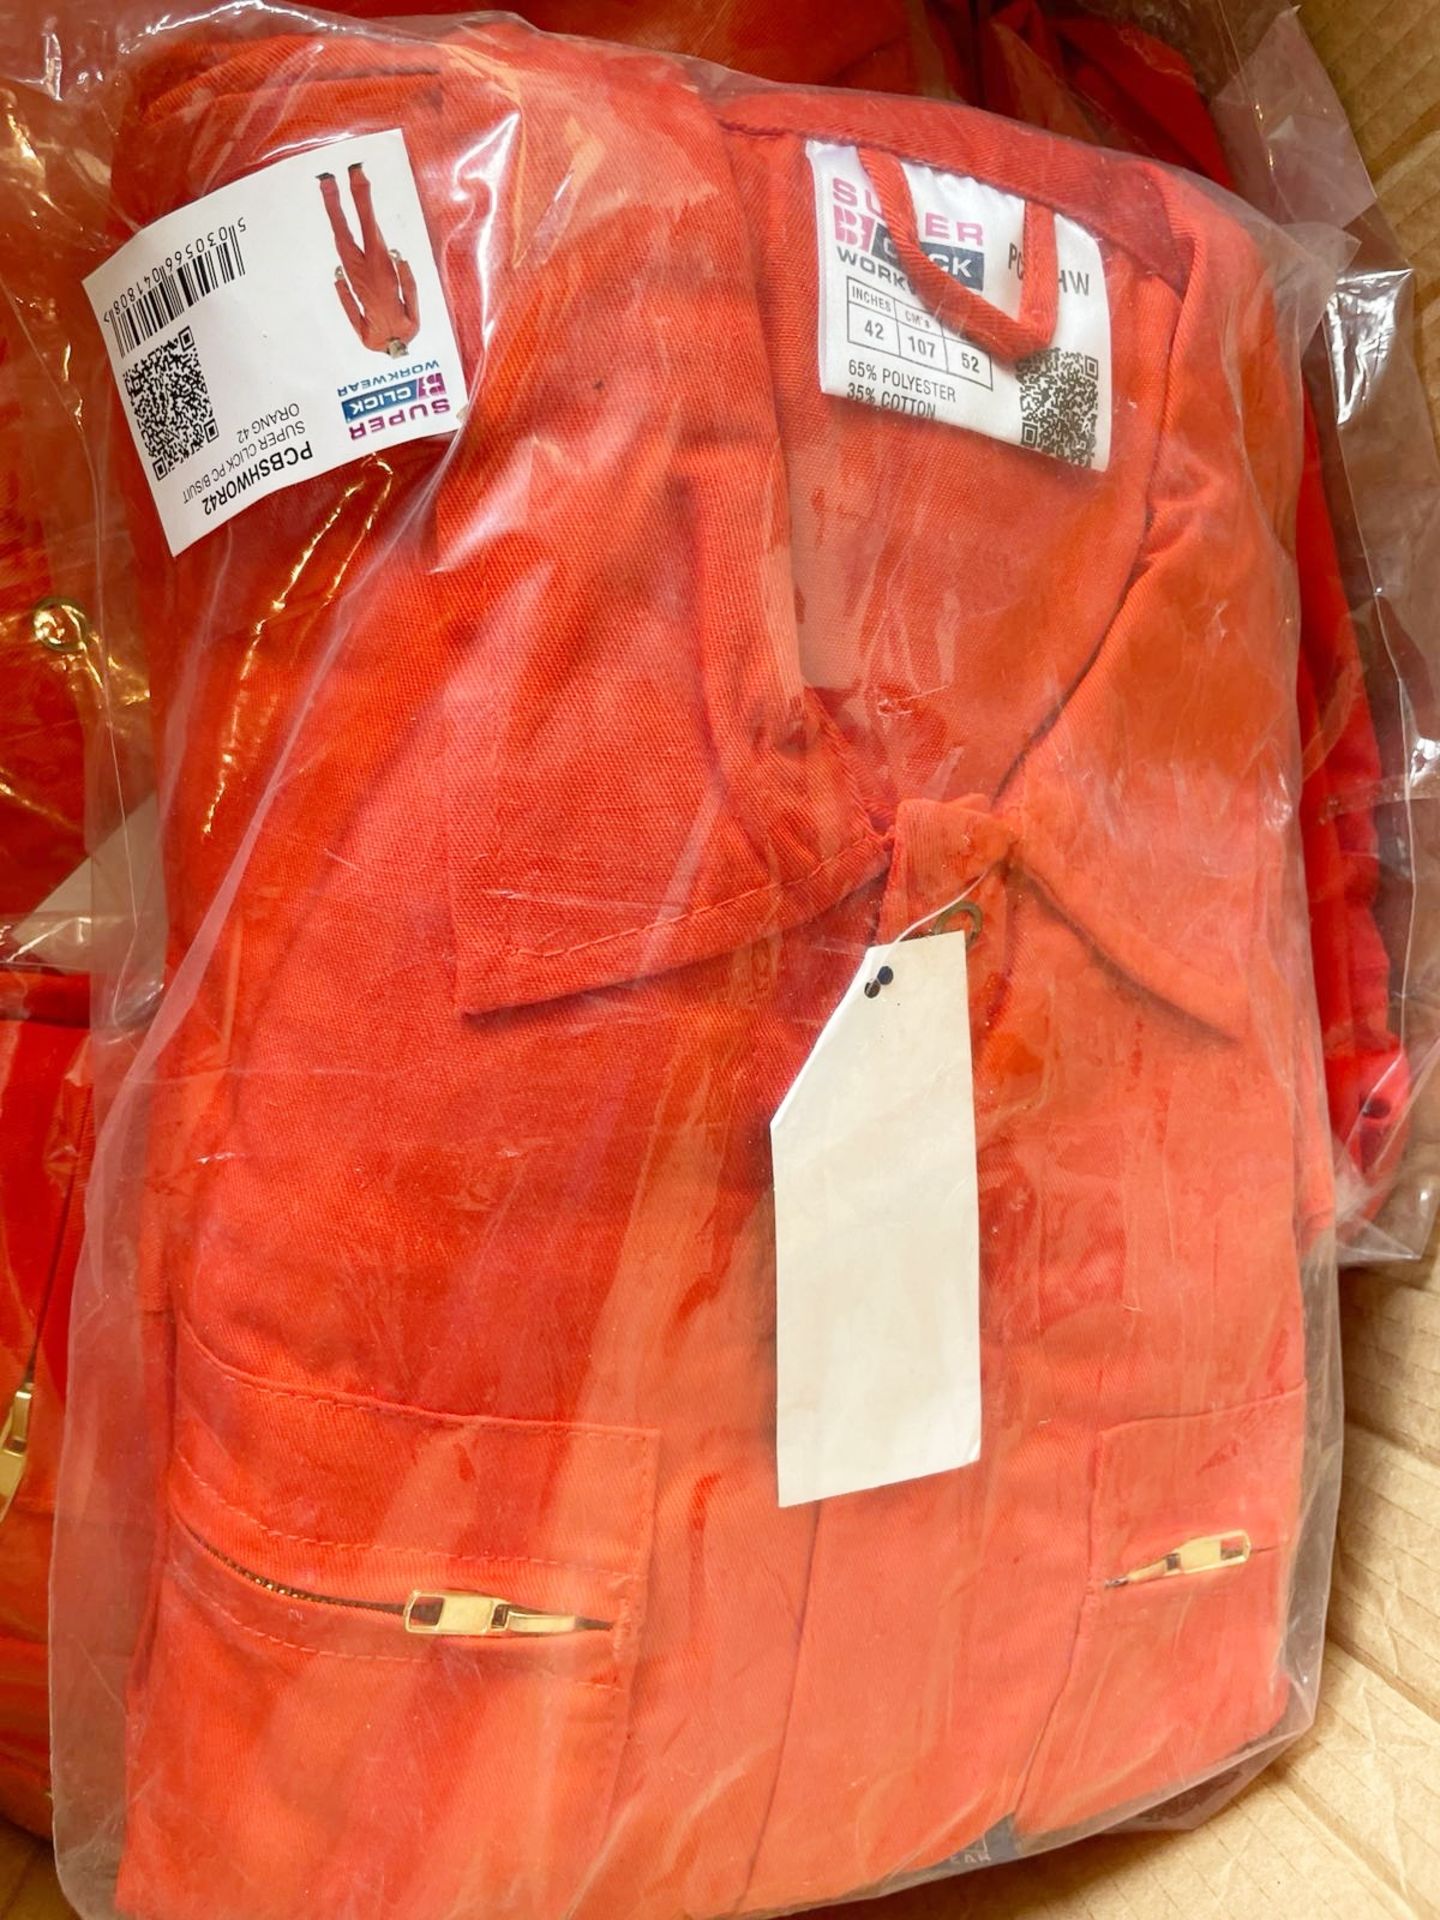 10 x Super Click Heavy Weight Orange Boilersuit - Size 42 / 46 - New in Packets - RRP £350 - Image 5 of 5